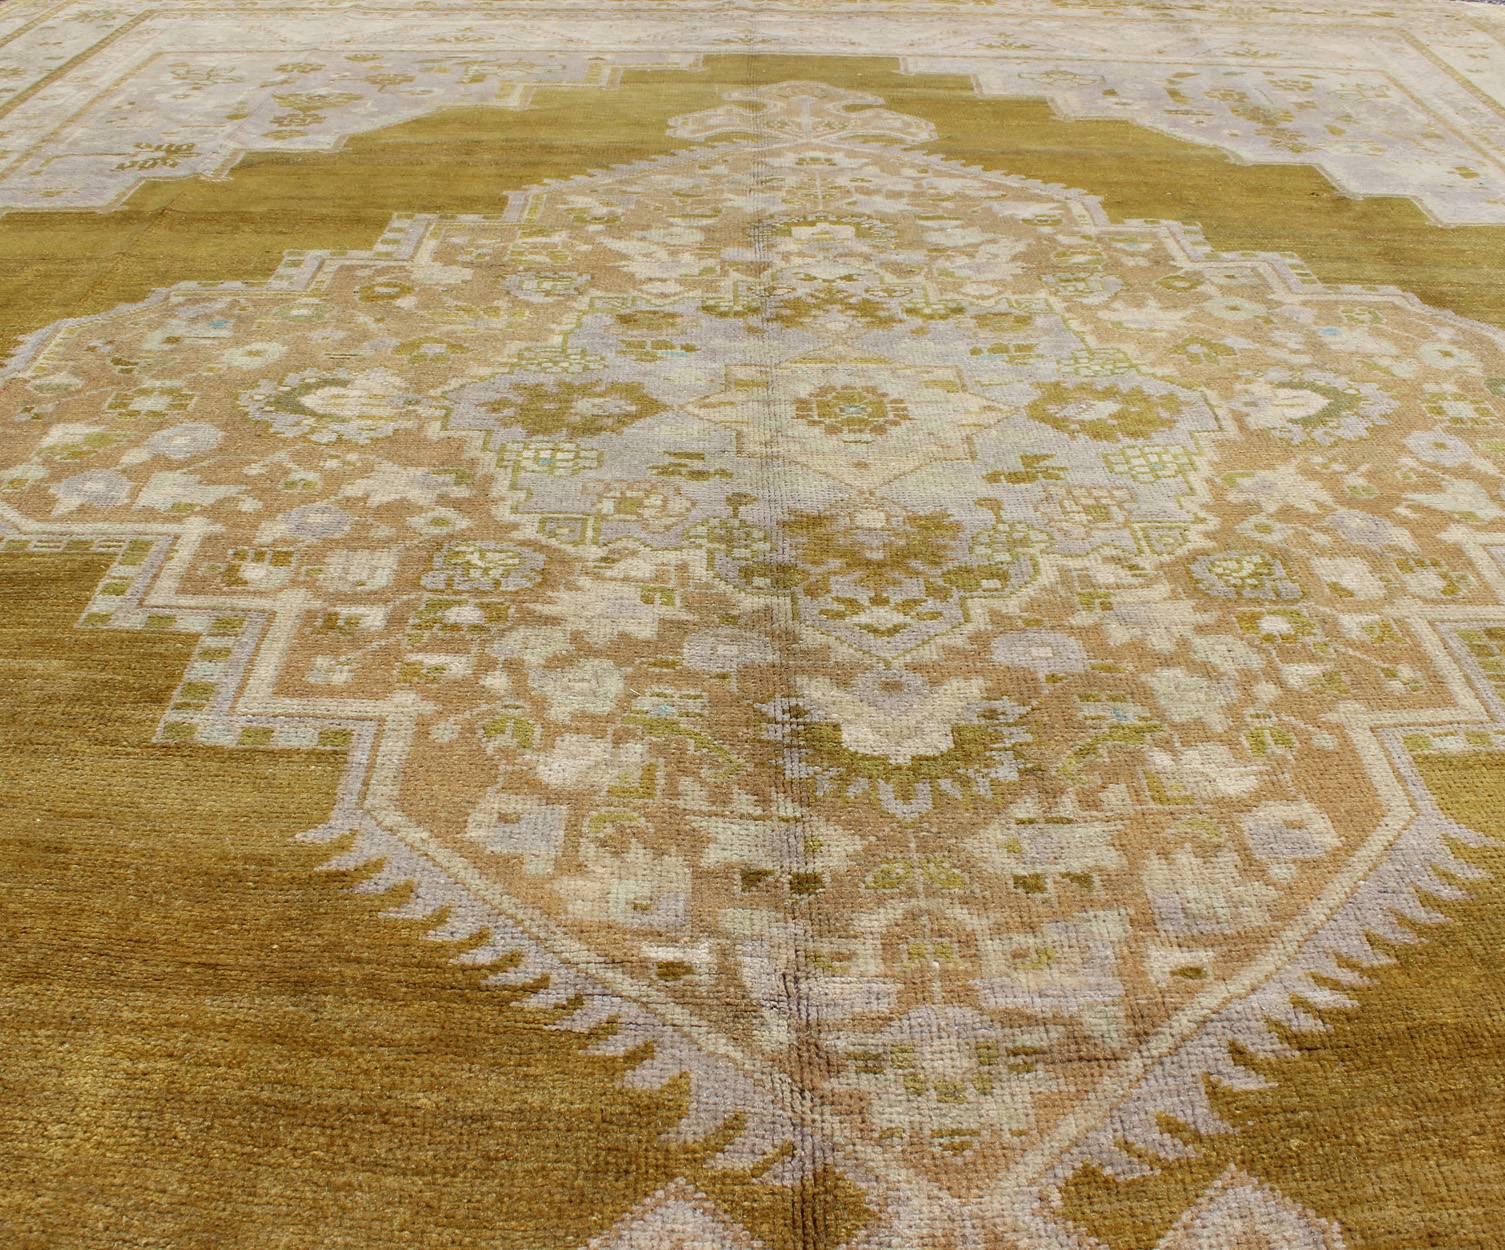 20th Century Vintage Turkish Oushak Rug in Saturated Gold And Warm Neutral Colors